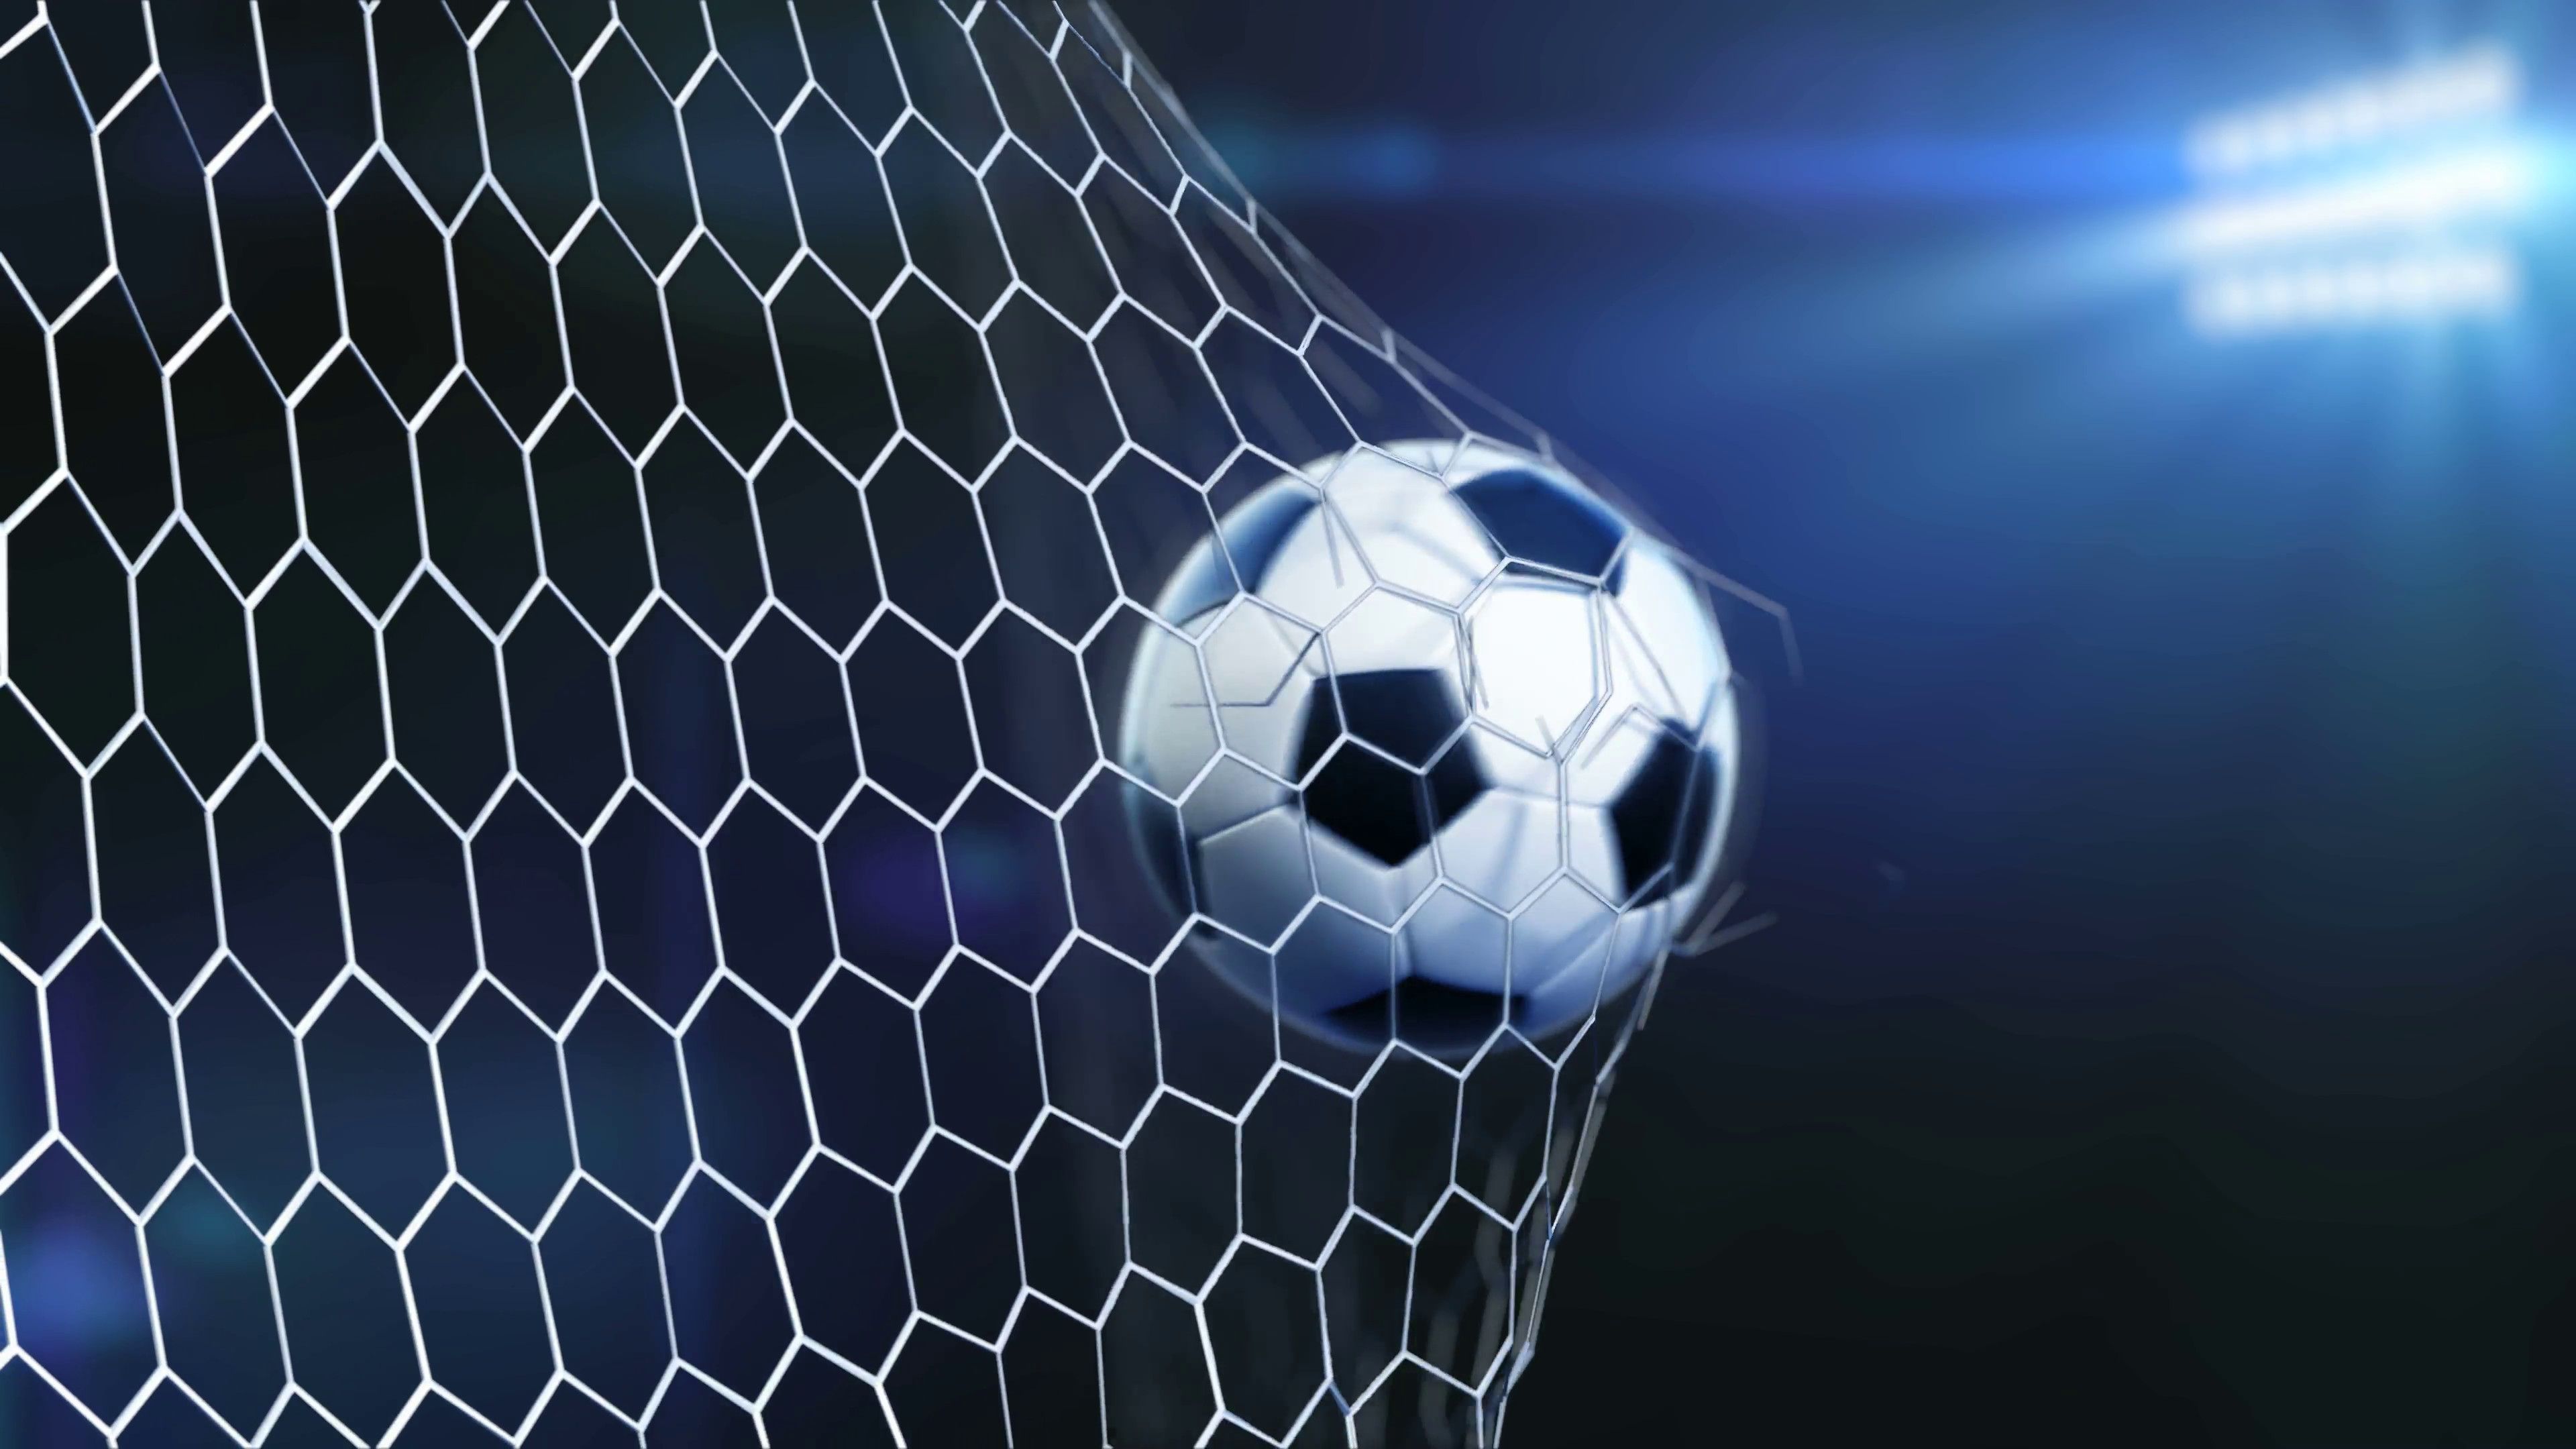 4k Slow Motion 3D Animation Of Soccer Ball Flying And Ball Flying Into Goal